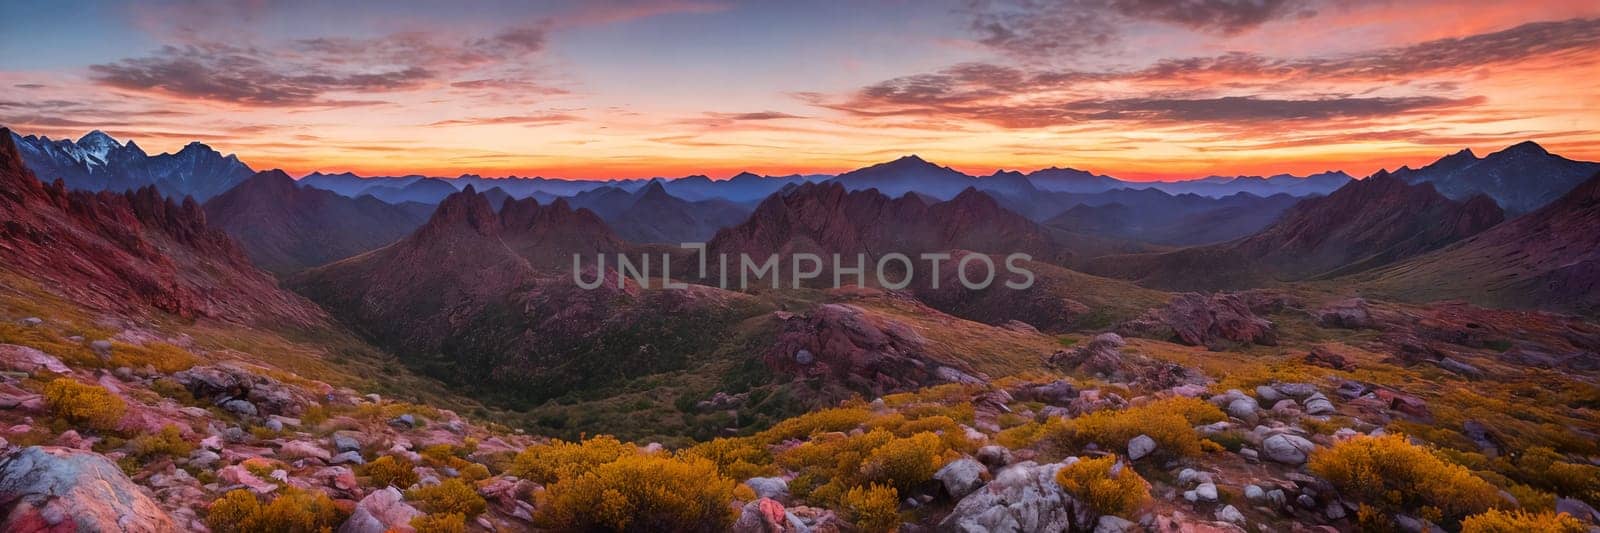 Rugged beauty of a mountain range at golden hour, with the sun setting in the background by GoodOlga